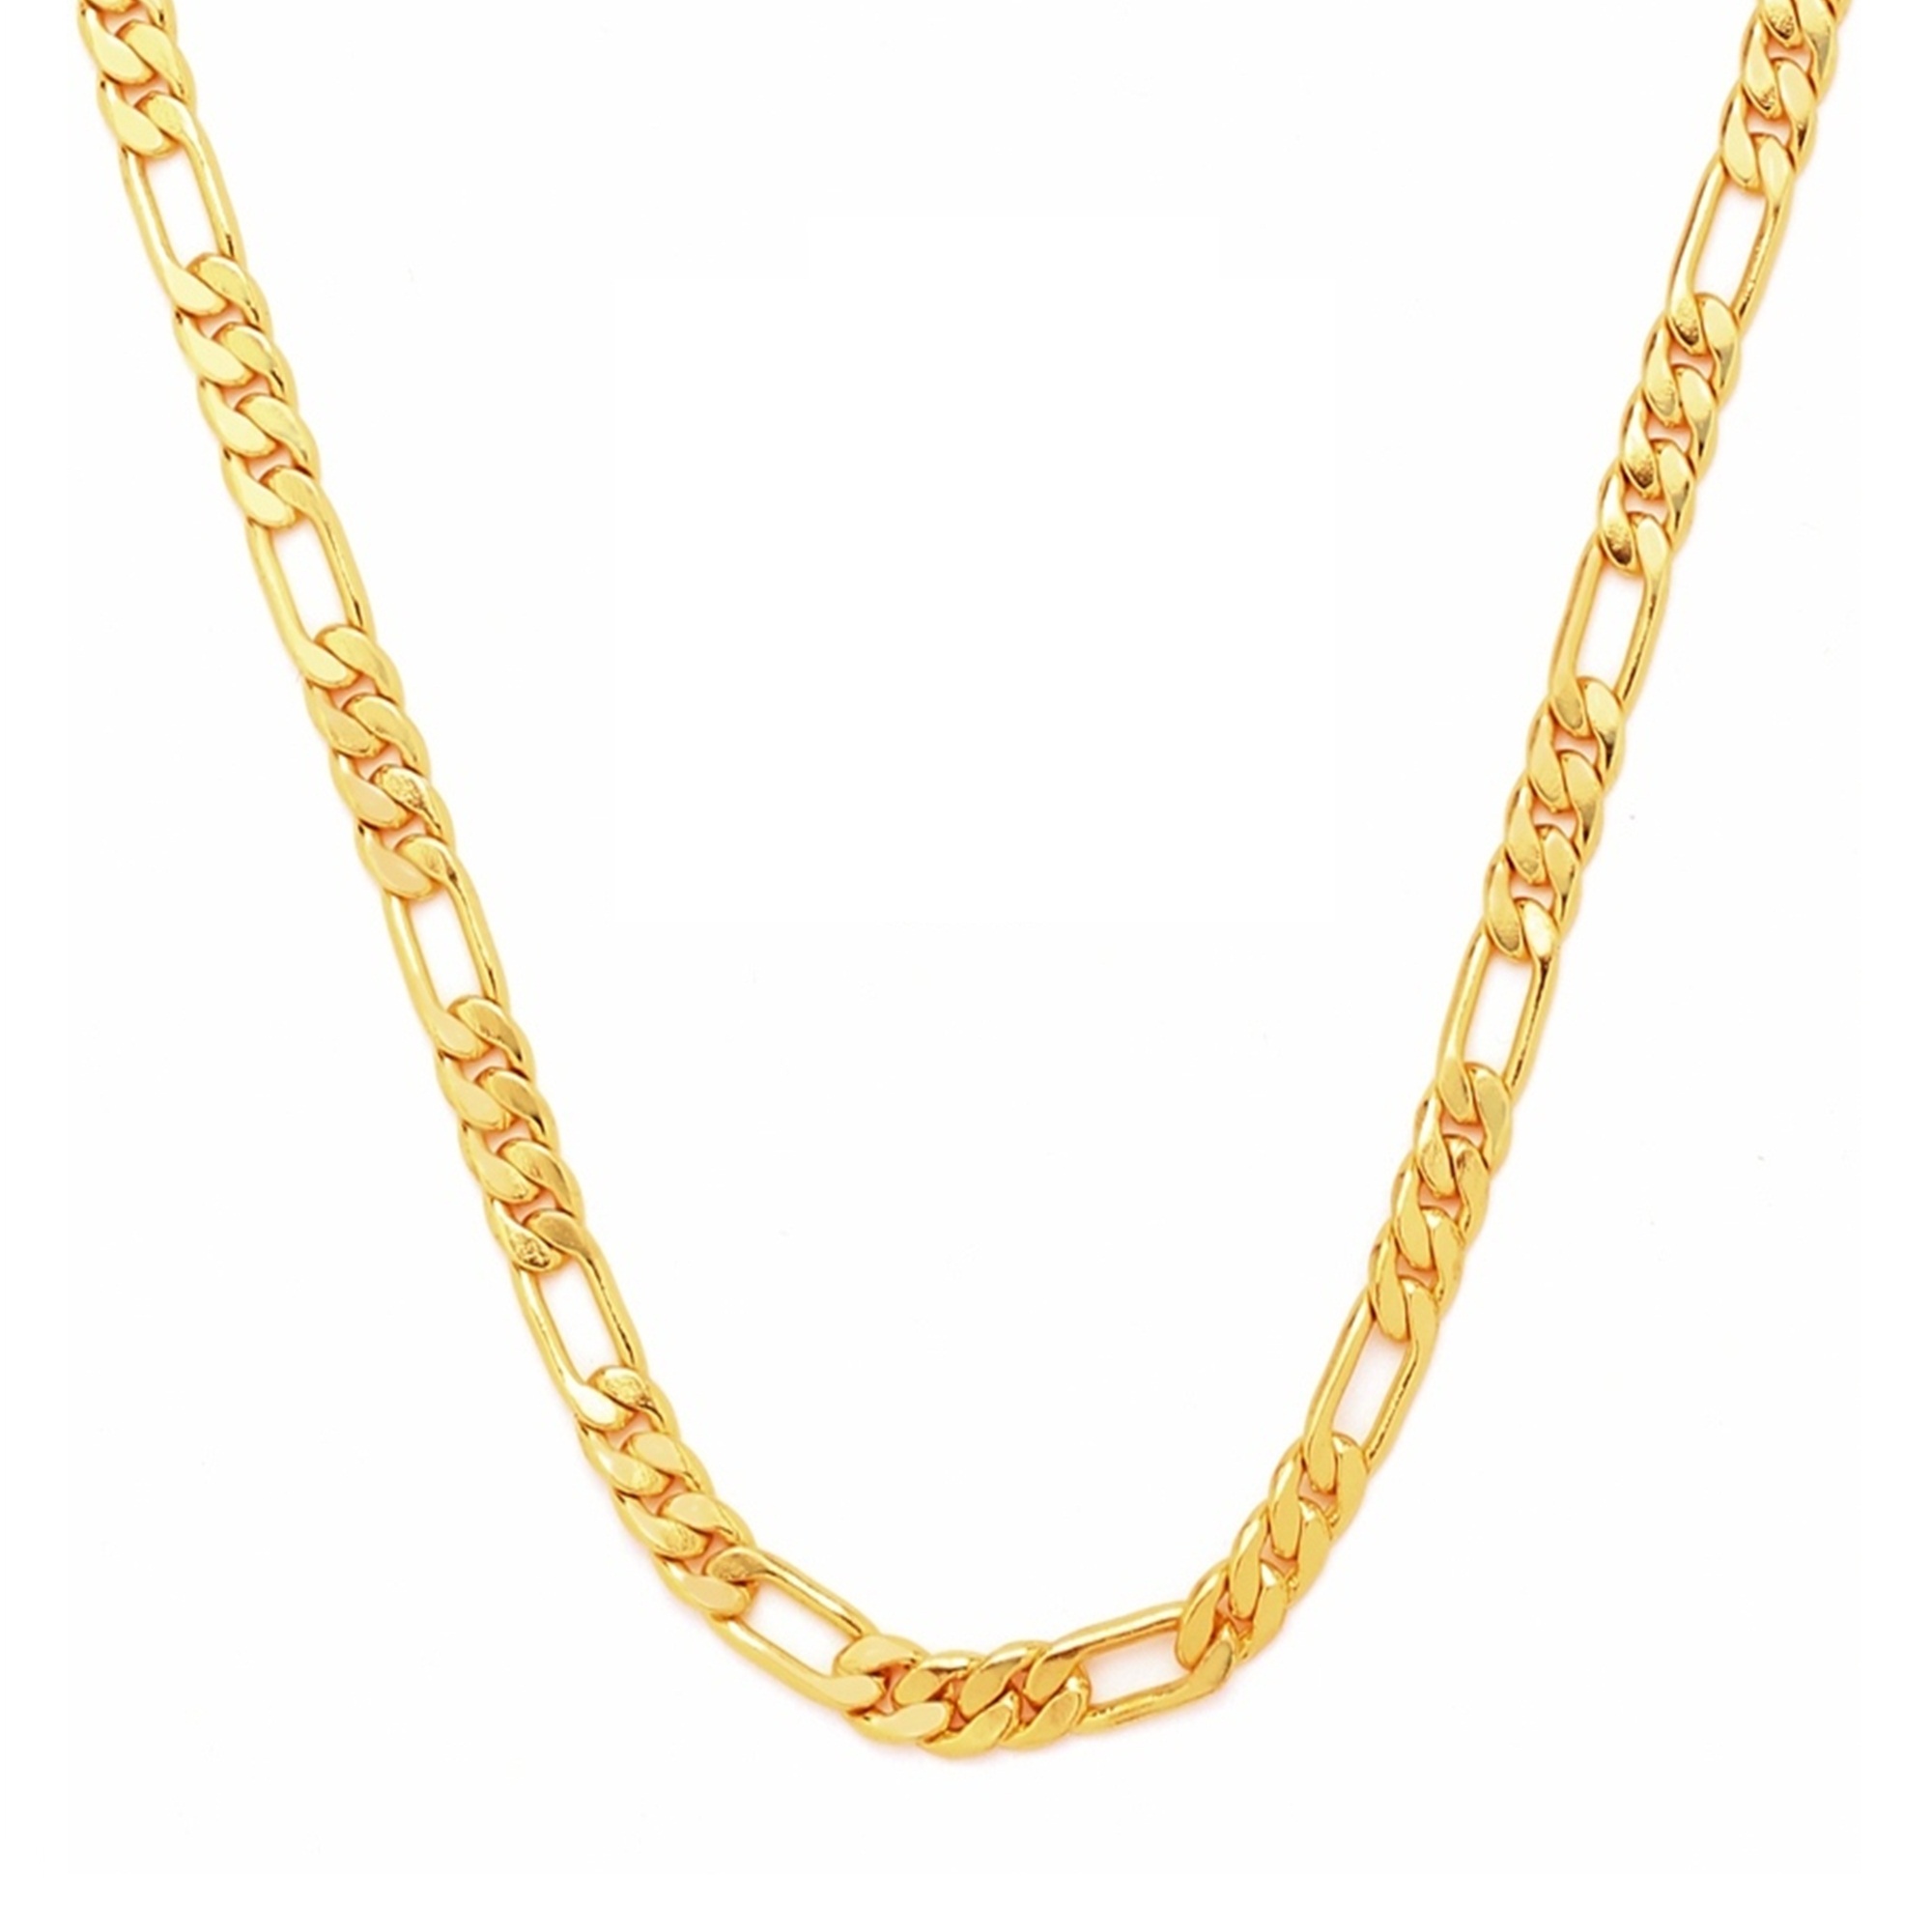 GoldNera Men Gold Plated Alloy Interlocked Chain  18 Inches 